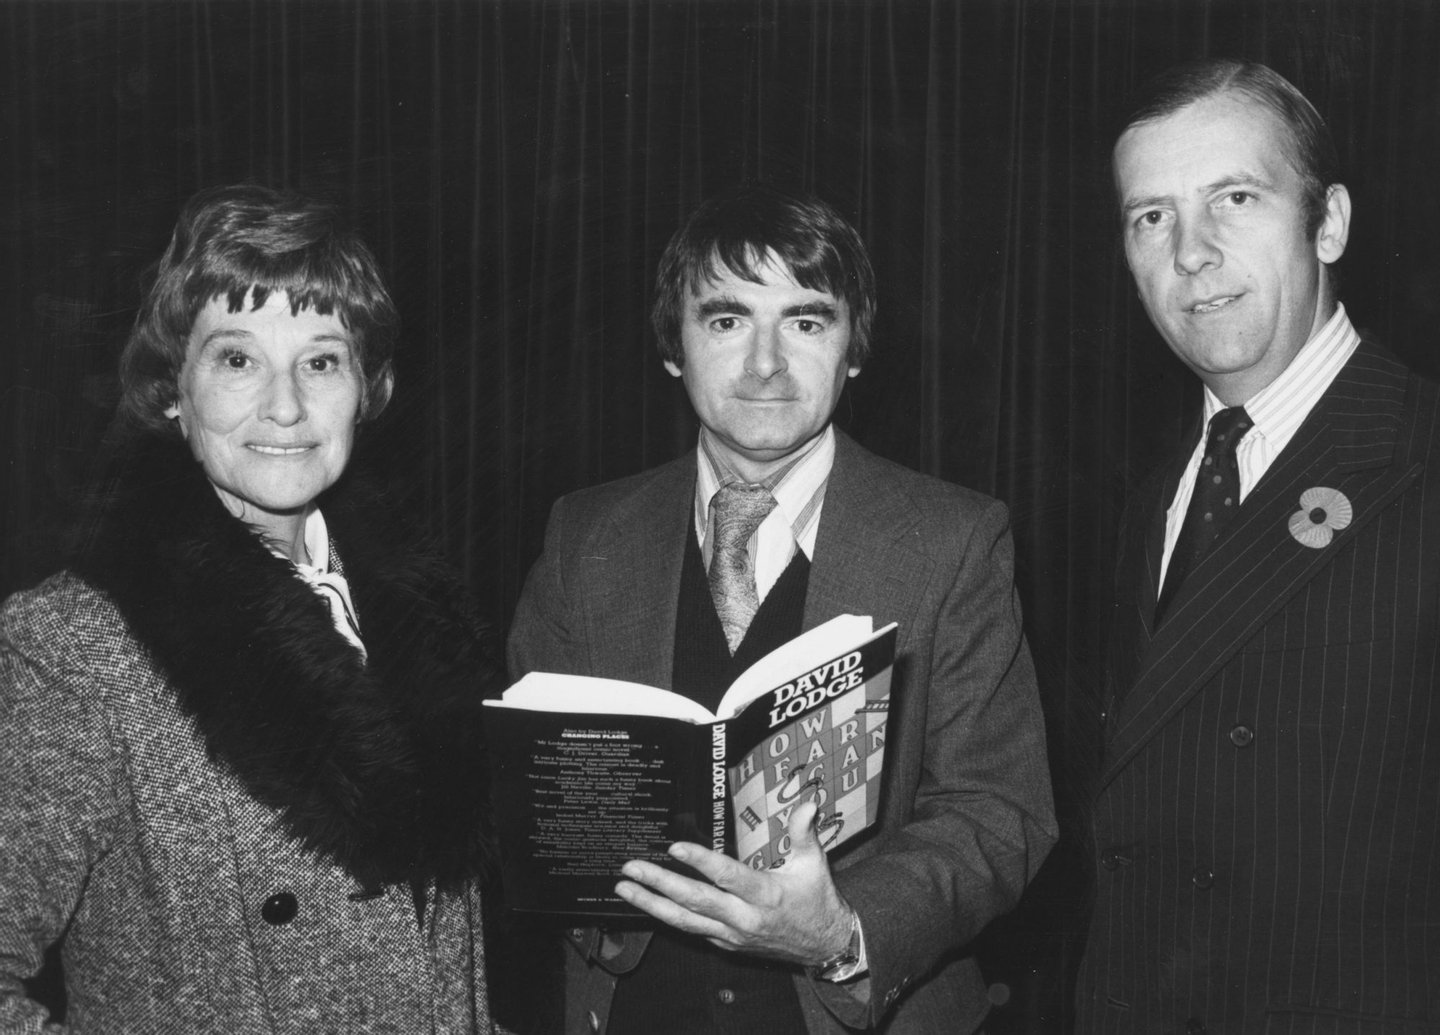 11th November 1980: British critic and novelist David Lodge (centre), with Mrs Mortimer (left) and Sam Whitbread (right) at the Whitbread Awards for Literature ceremony, in which Lodge's novel 'How Far Can You Go' won Book Of The Year Award. (Photo by David Levenson/Keystone/Getty Images)